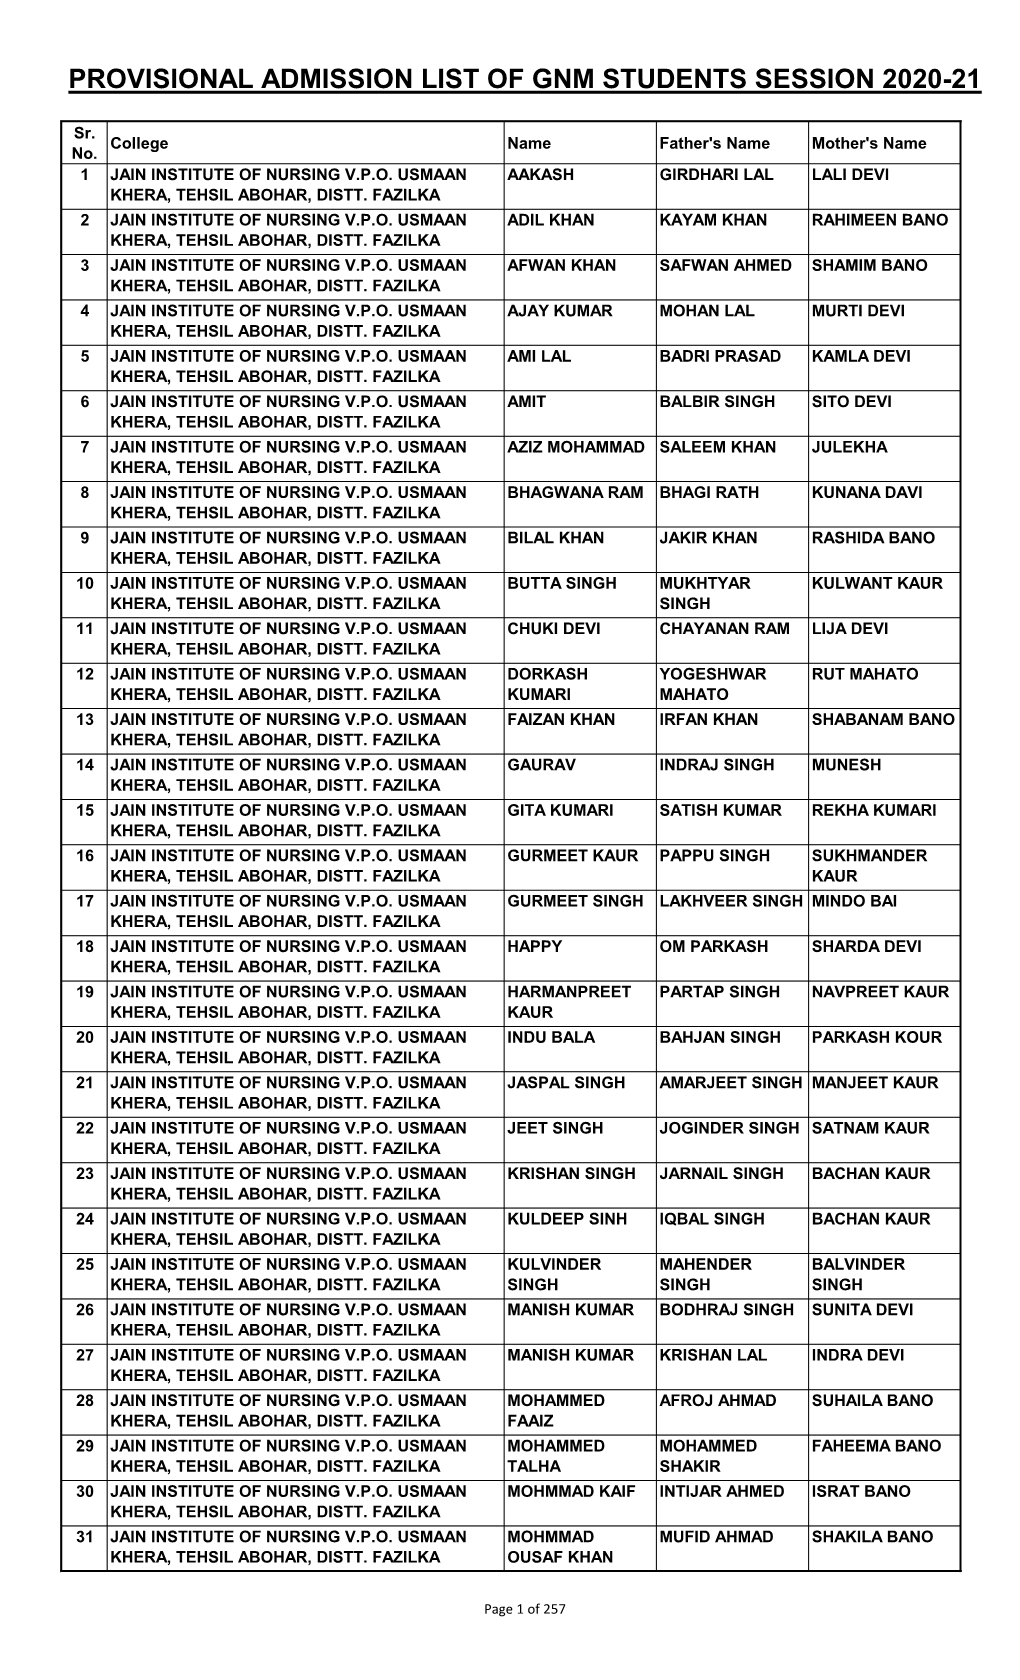 Provisional Admission List of Gnm Students Session 2020-21